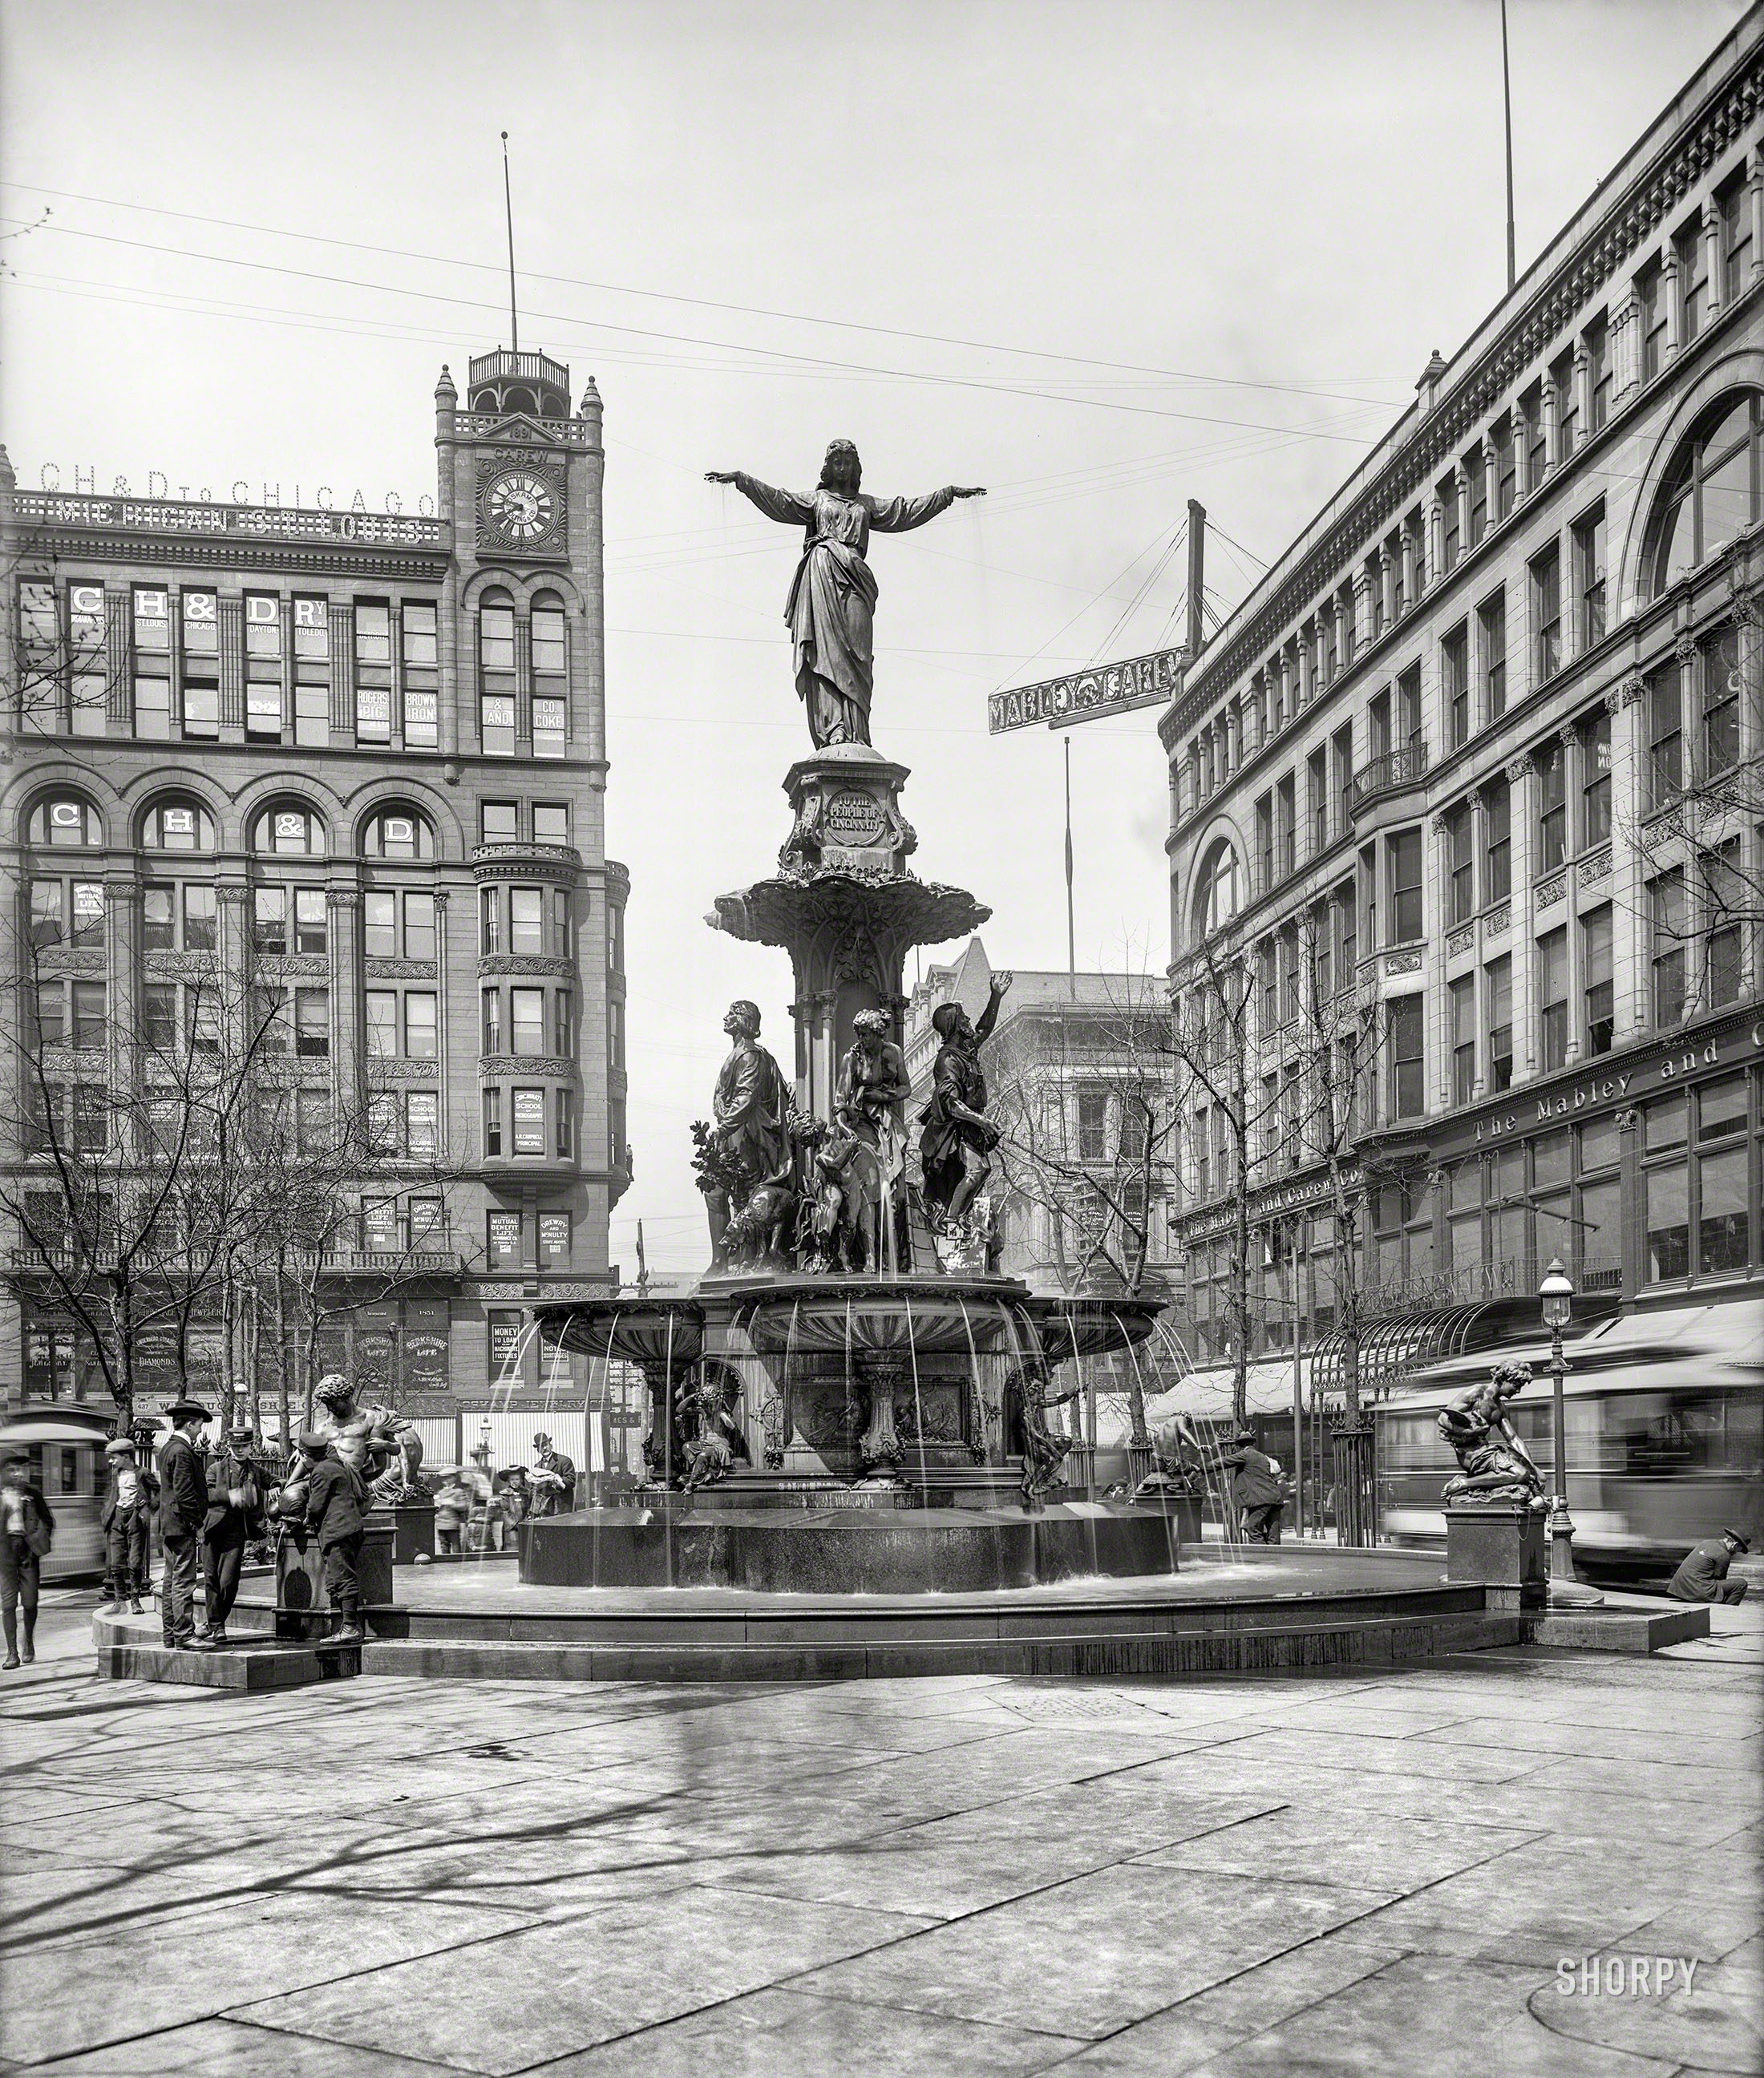 1904. "Tyler Davidson Fountain ('The Genius of Water'), Cincinnati, O." 8x10 inch dry plate glass negative, Detroit Photographic Company. View full size.